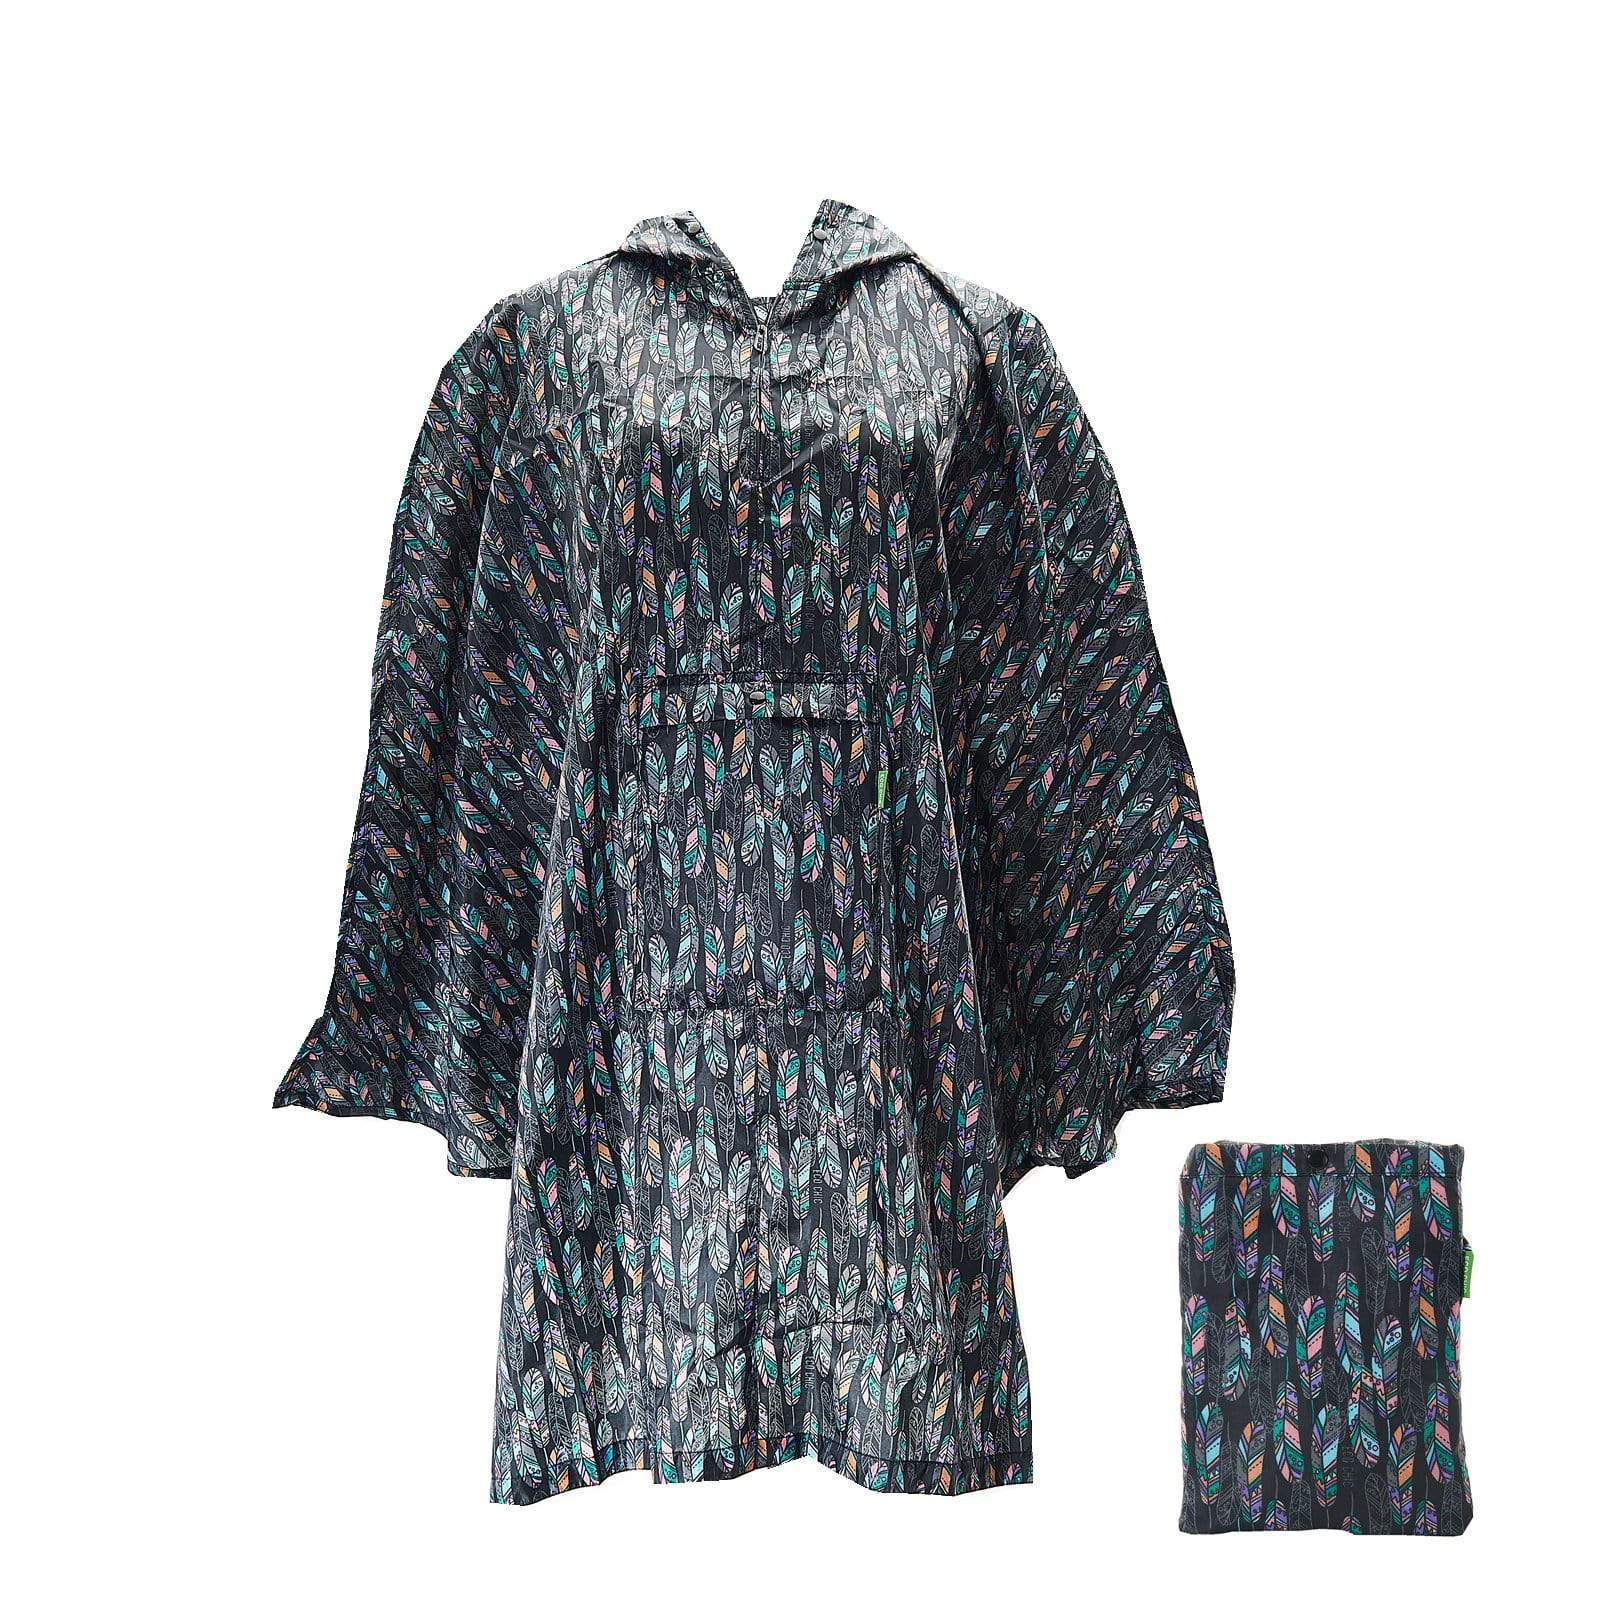 Eco Chic Black Feather Waterproof Foldable Adult Poncho